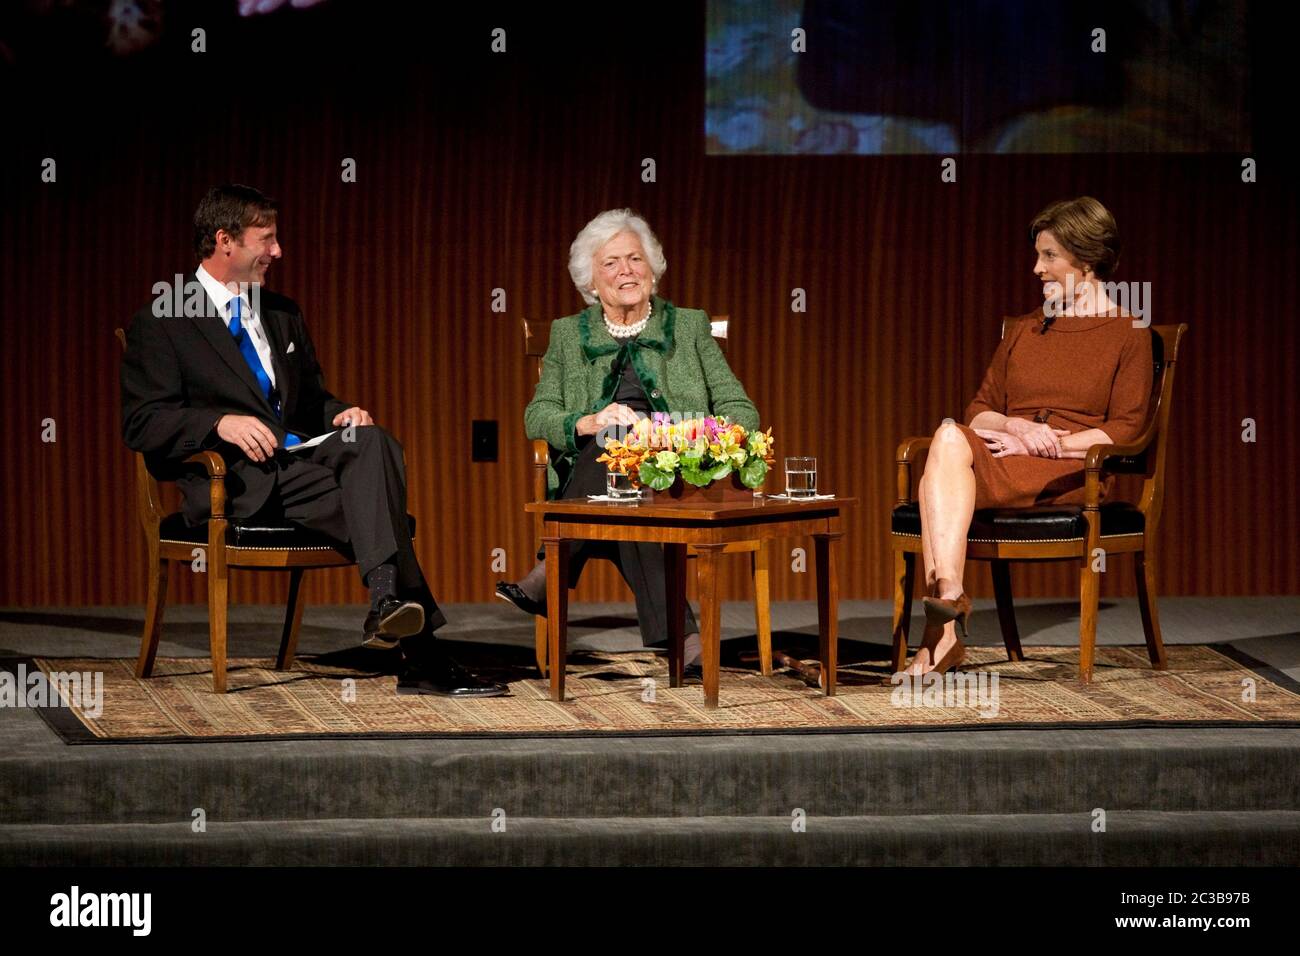 November 16th, 2012 Austin, Texas USA: Former First Ladies Barbara Bush (center) and  Laura Bush during 'The Enduring Legacies of America's First Ladies' conference at the LBJ Presidential Library. Moderator Mark Updegrove sits on the left side.  ©MKC / Daemmrich Photos Stock Photo